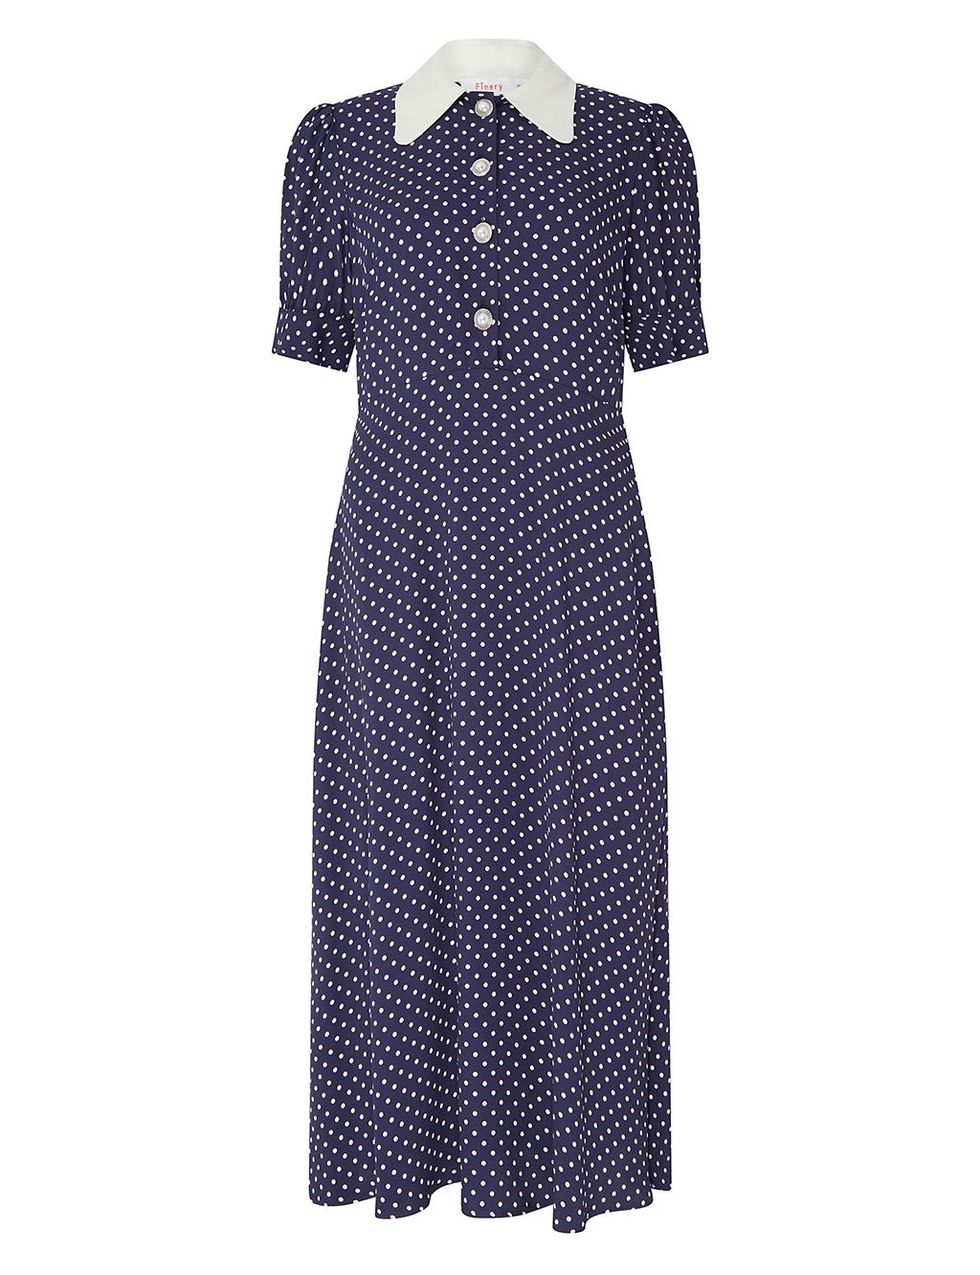 10 of the prettiest polka dot dresses for spring and summer